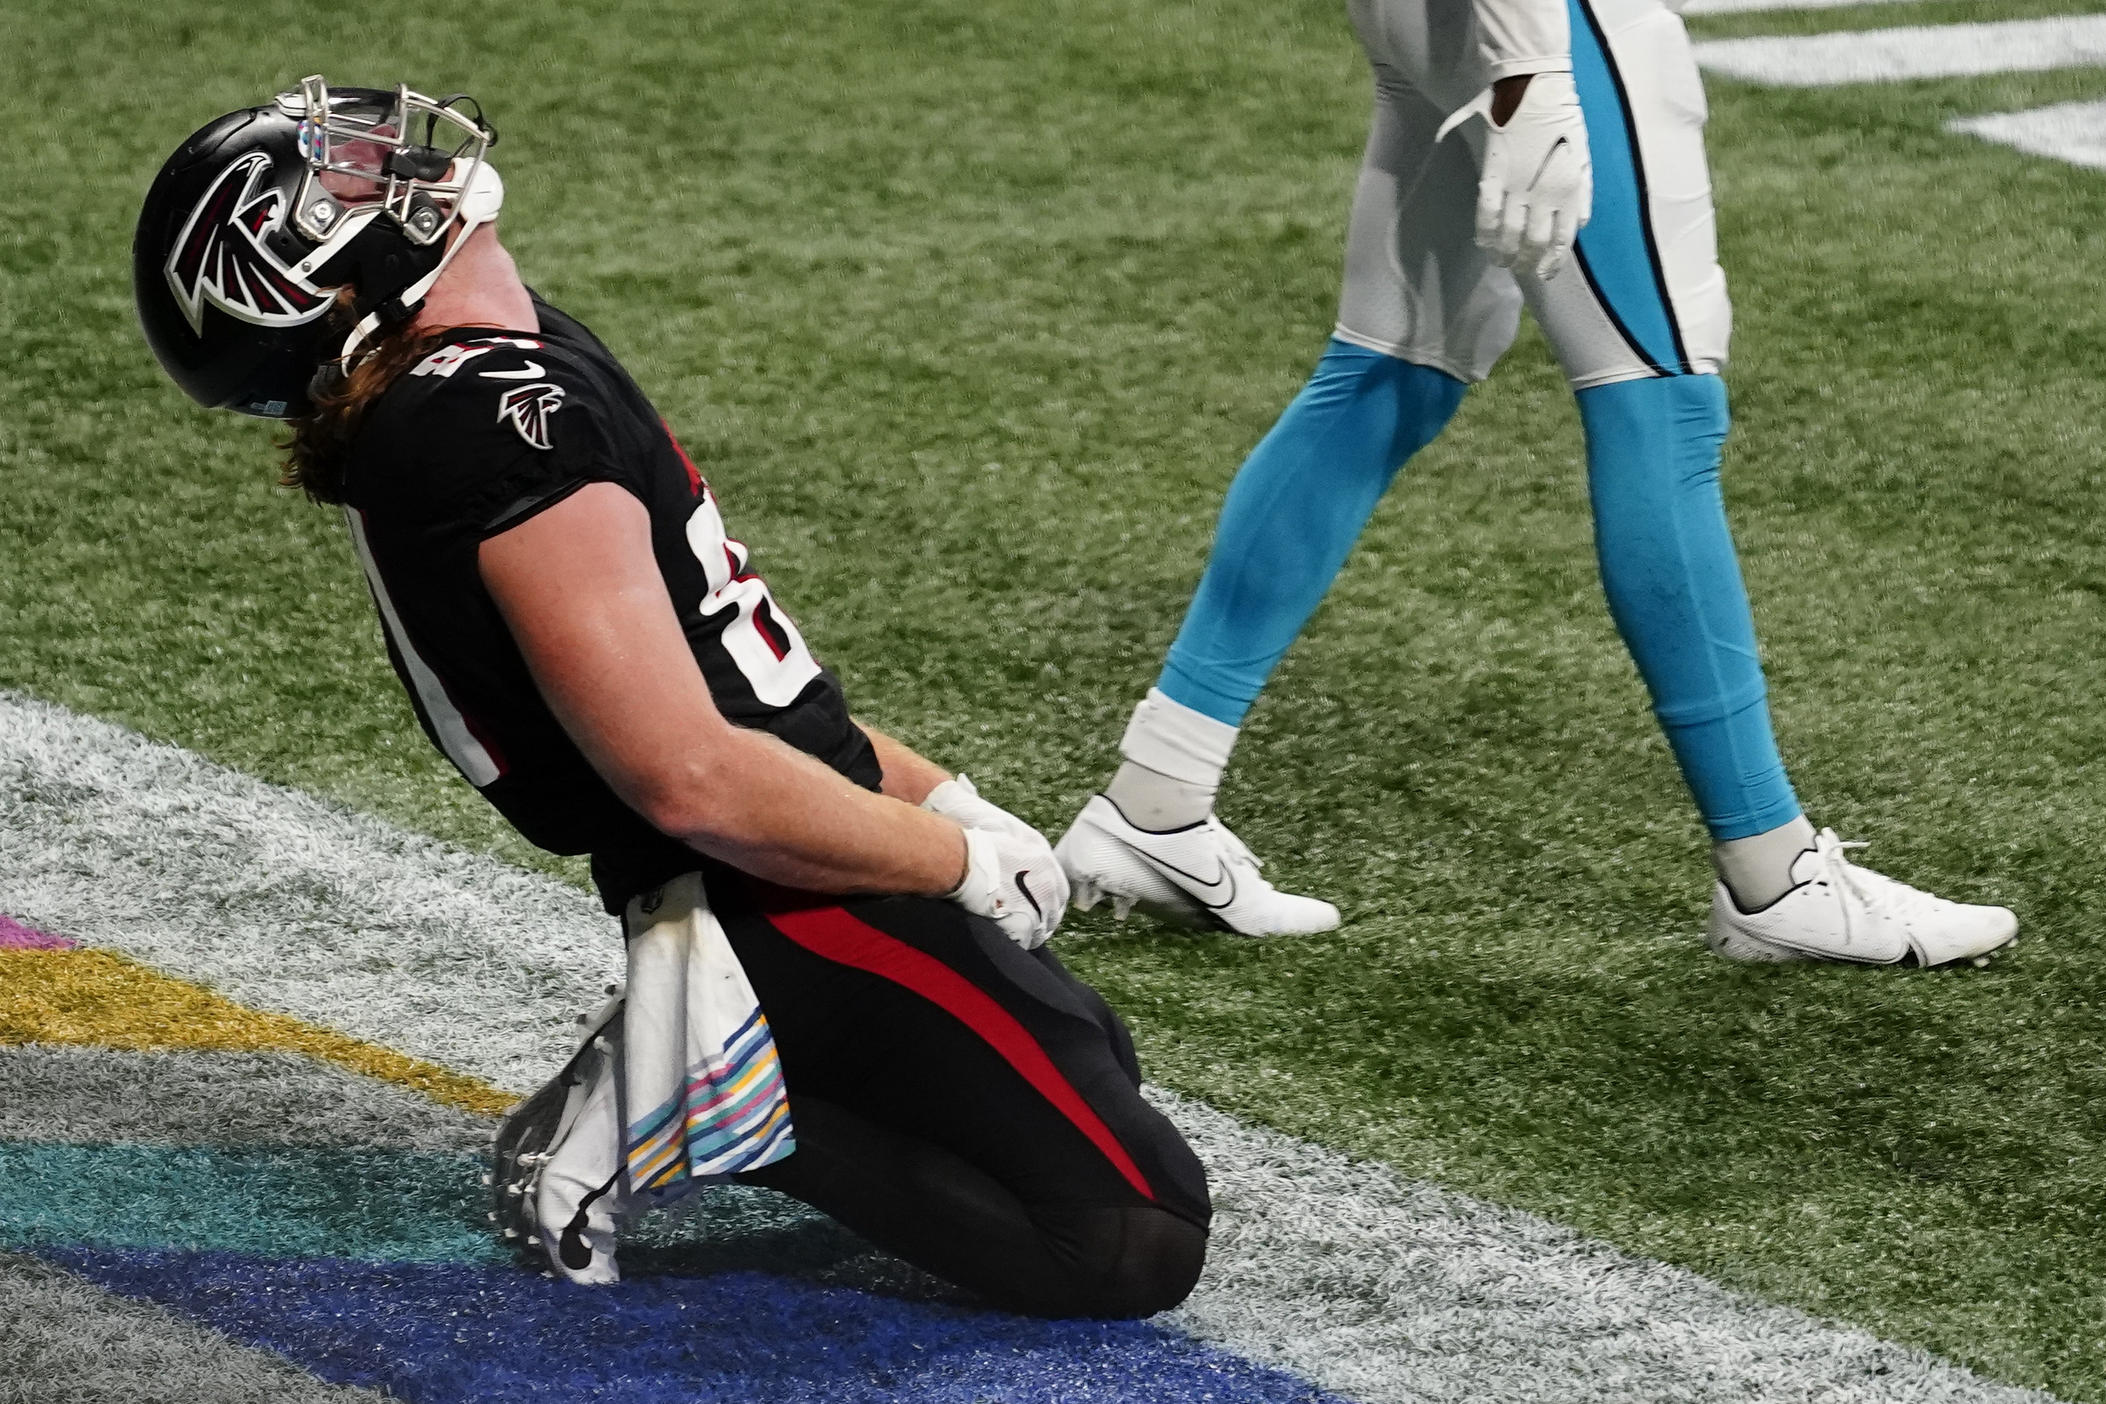 Atlanta Falcons tight end Hayden Hurst (81) reacts to missing a pass in the end zone against the Carolina Panthers during the second half of an NFL football game, Sunday, Oct. 11, 2020, in Atlanta. (AP Photo/Brynn Anderson)